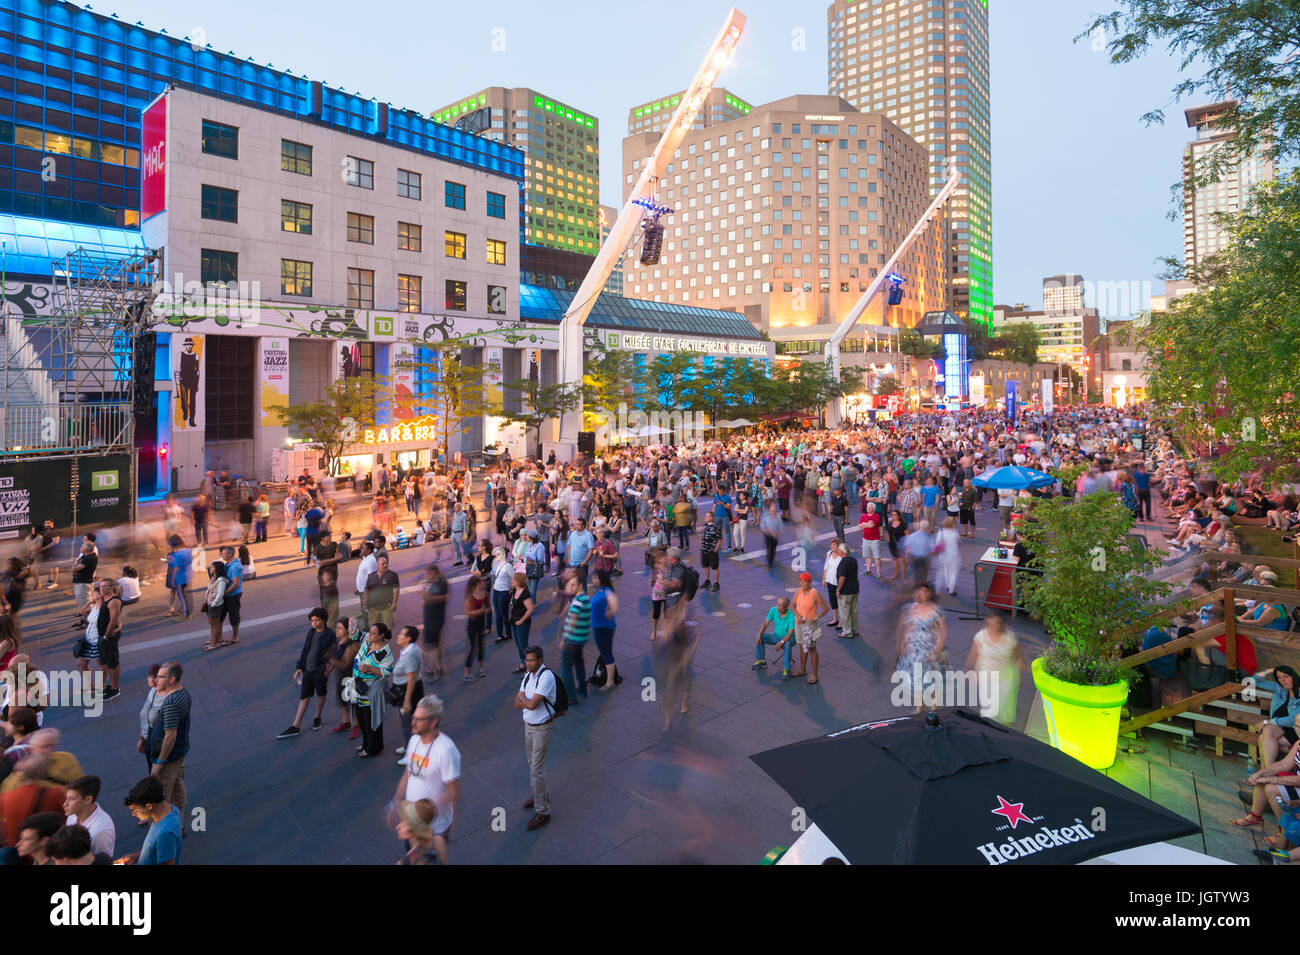 Montreal, Canada - 5 July 2017: People gathering at Place des Festivals to attend a music concert at the Montreal Jazz Festival. Stock Photo